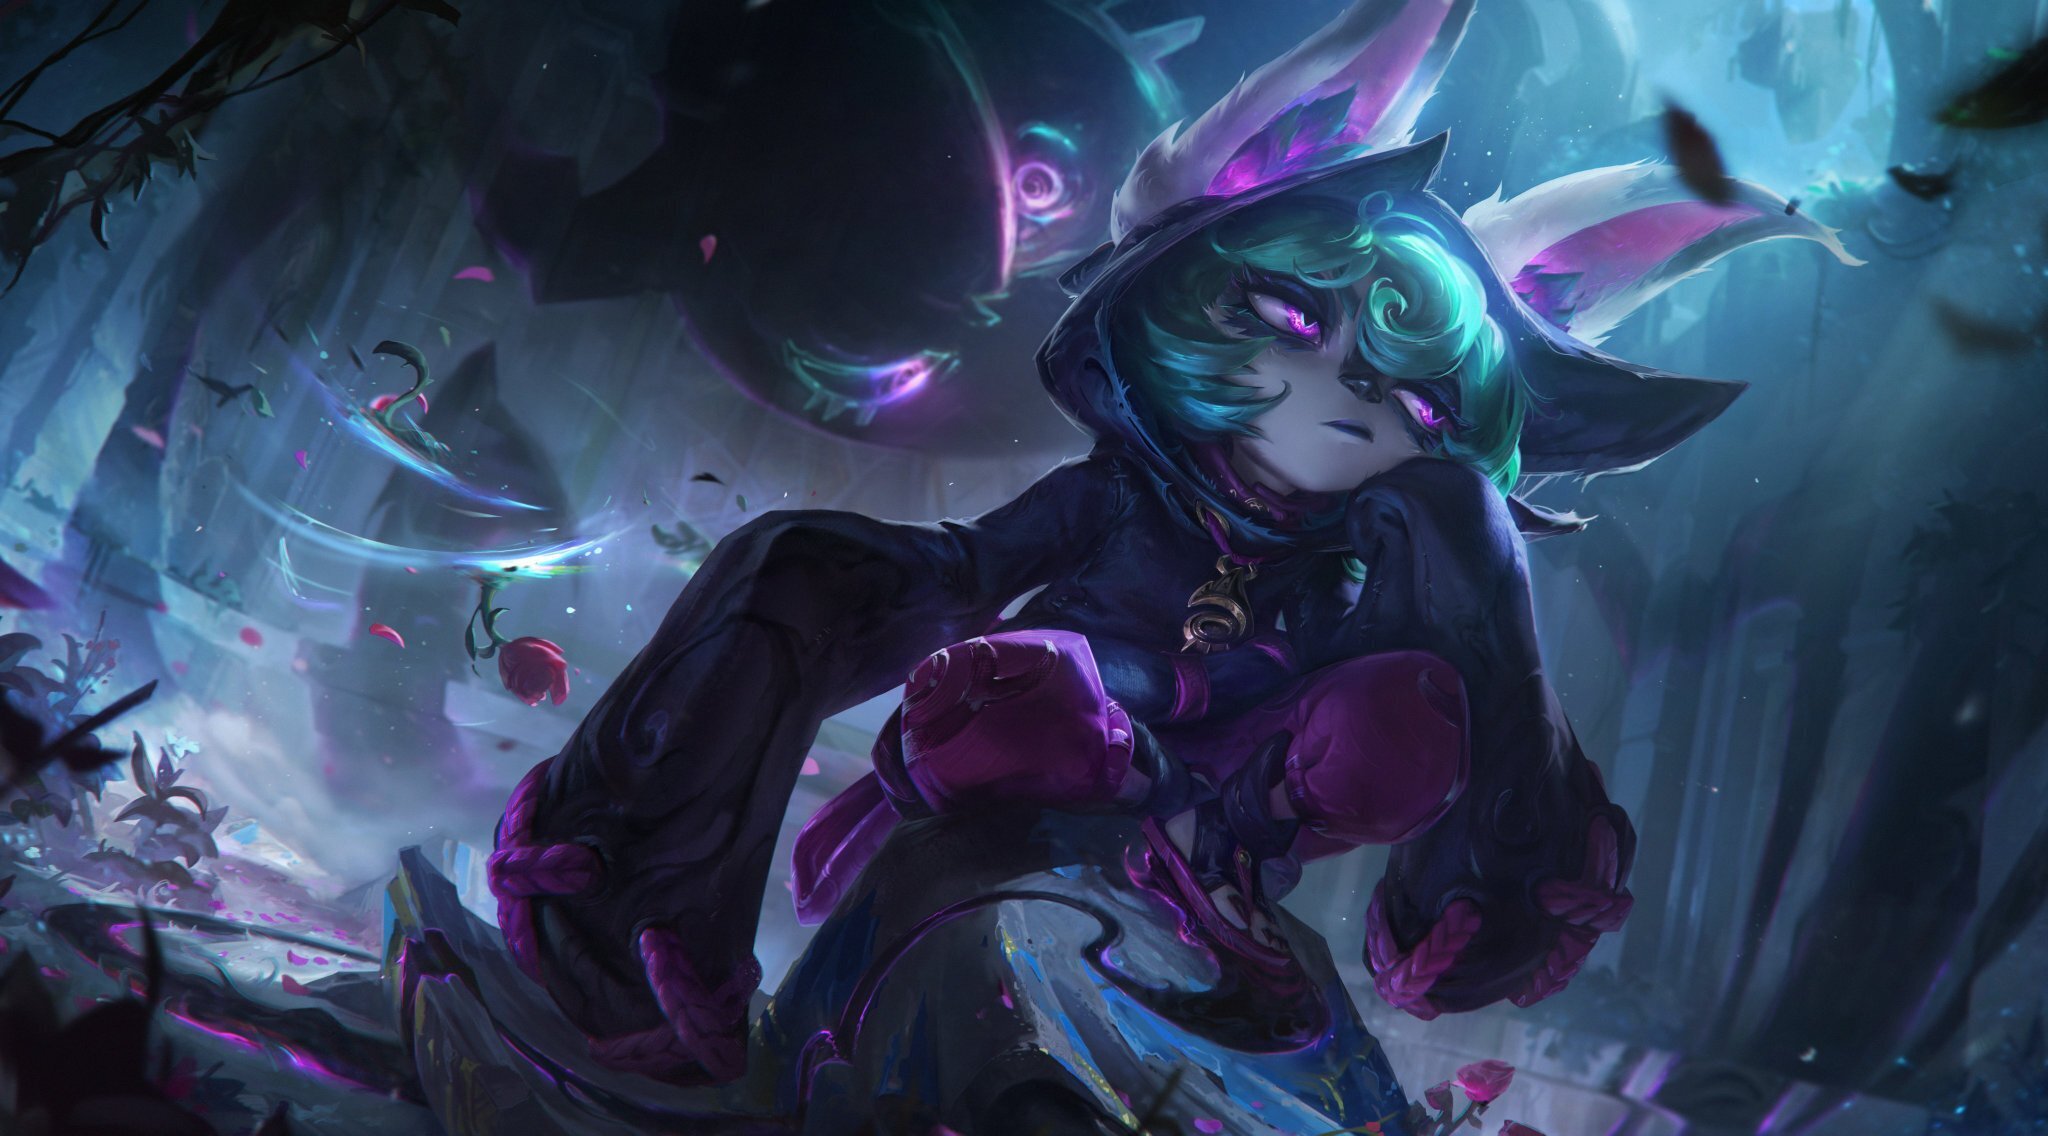 Vex's ultimate turns enemy Veigar's laning phase into a nightmare!